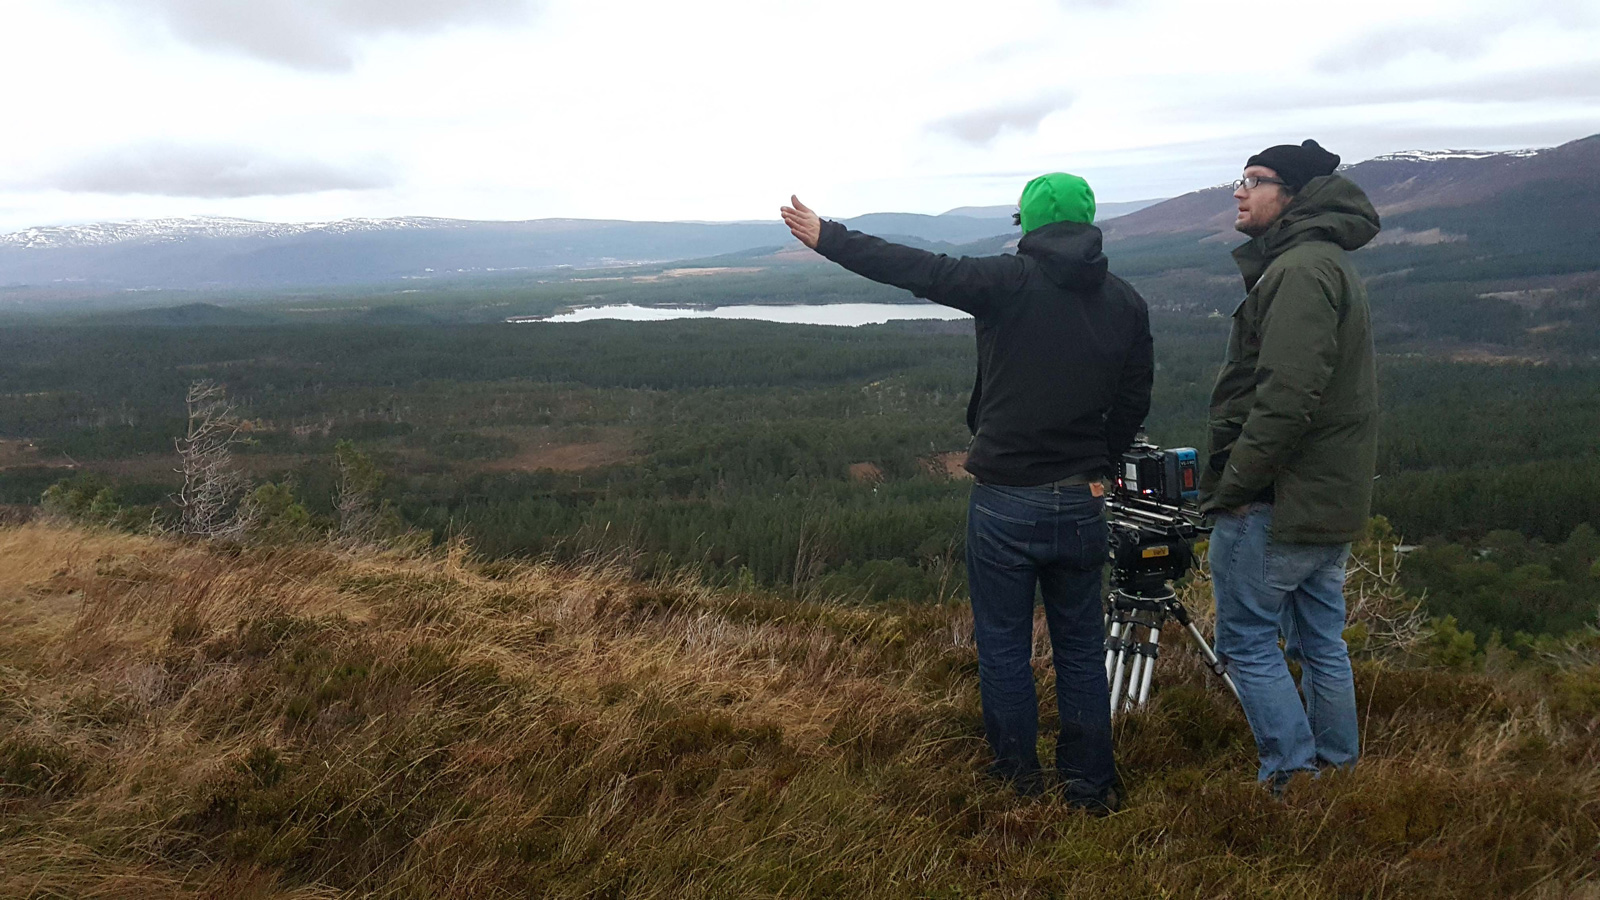 Calibre filming on location - two people stand on a hillside in Scotland with a tripod